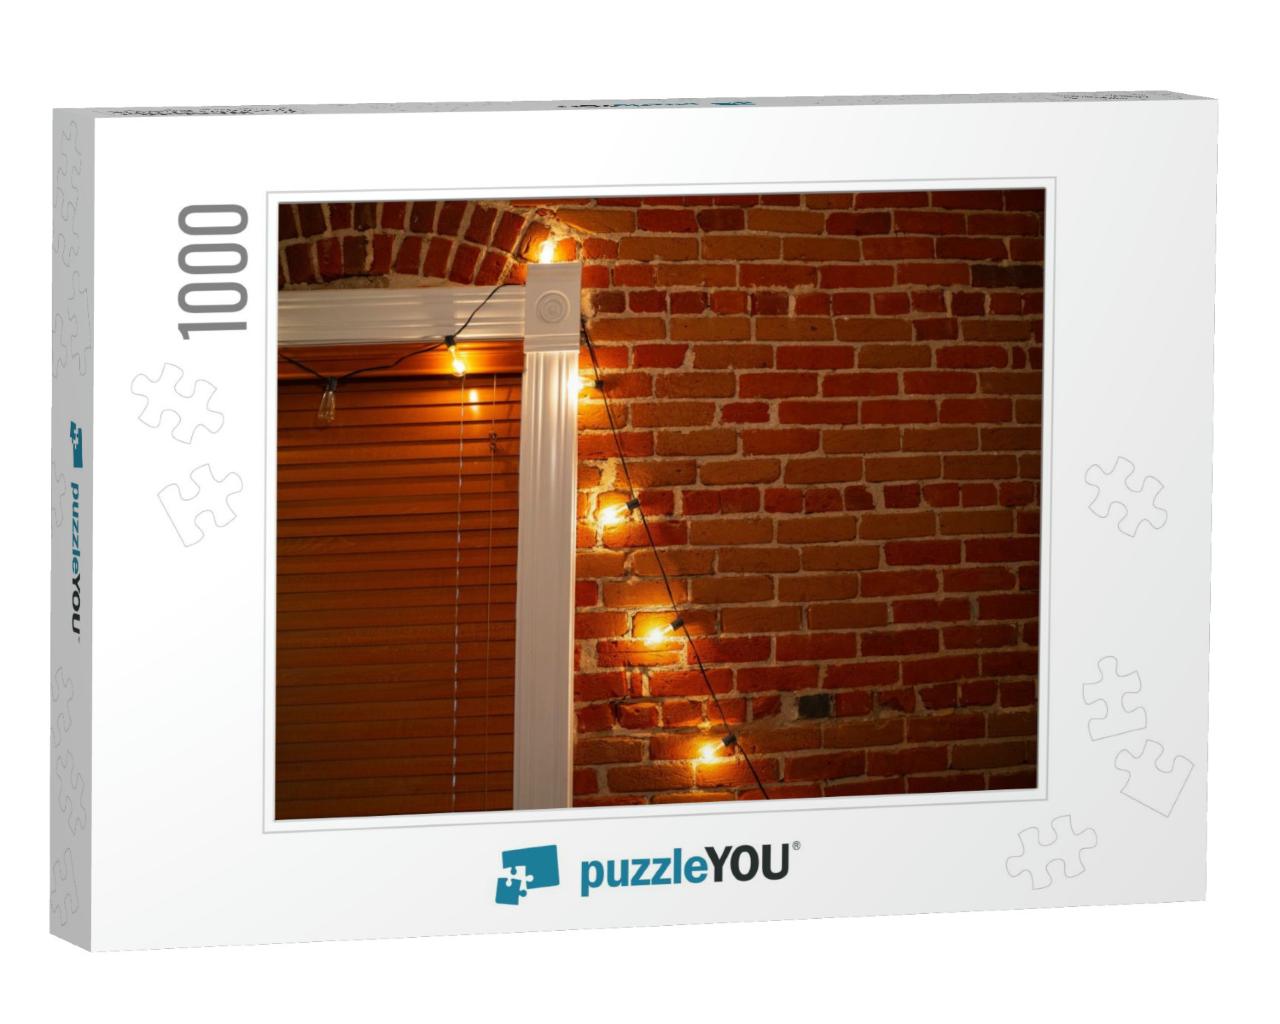 The String of Vintage Lights Bulbs Inside At Night, Light... Jigsaw Puzzle with 1000 pieces